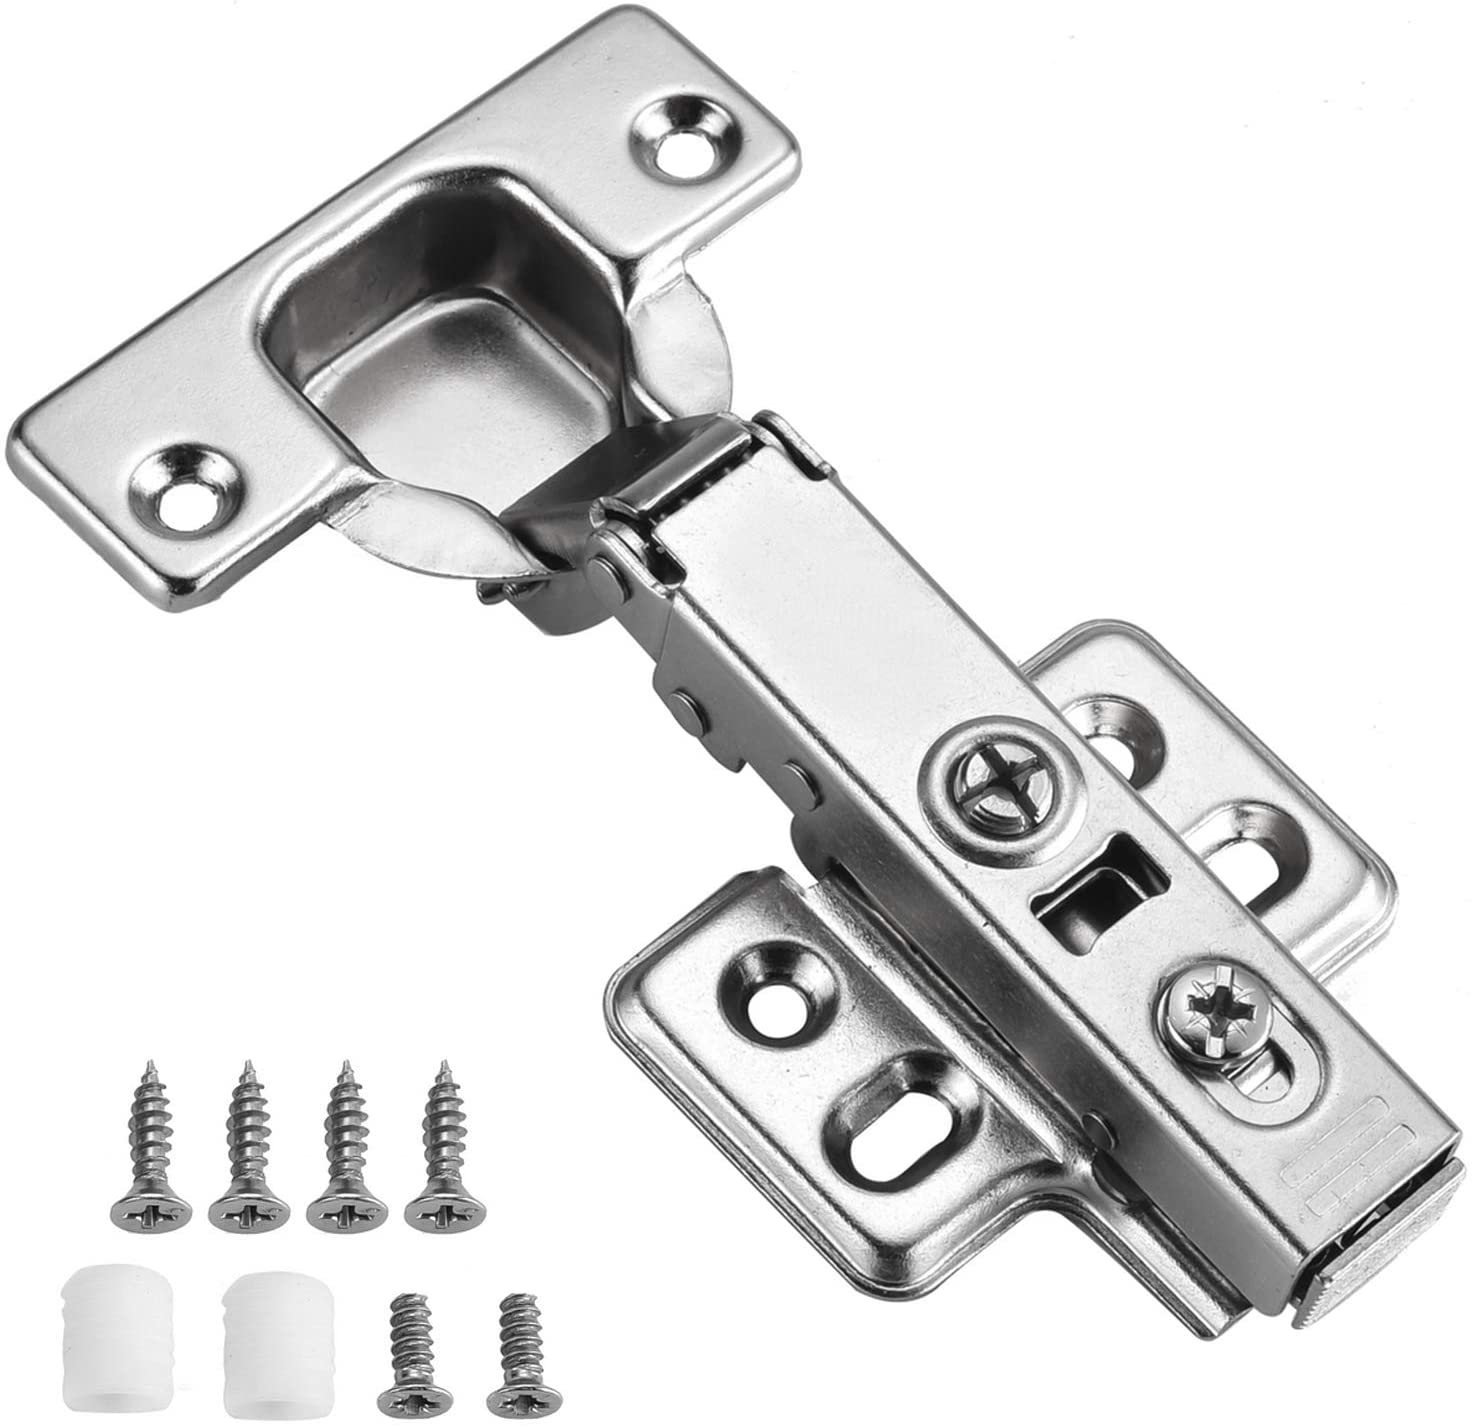 Luokim 20pcs Standard Cabinet Hinge,Fit for Frameless Cabinet,European Full Overlay,Soft Closing,Four-Hole mounting Plate Hinges,Nickel Plated Finish - image 1 of 7